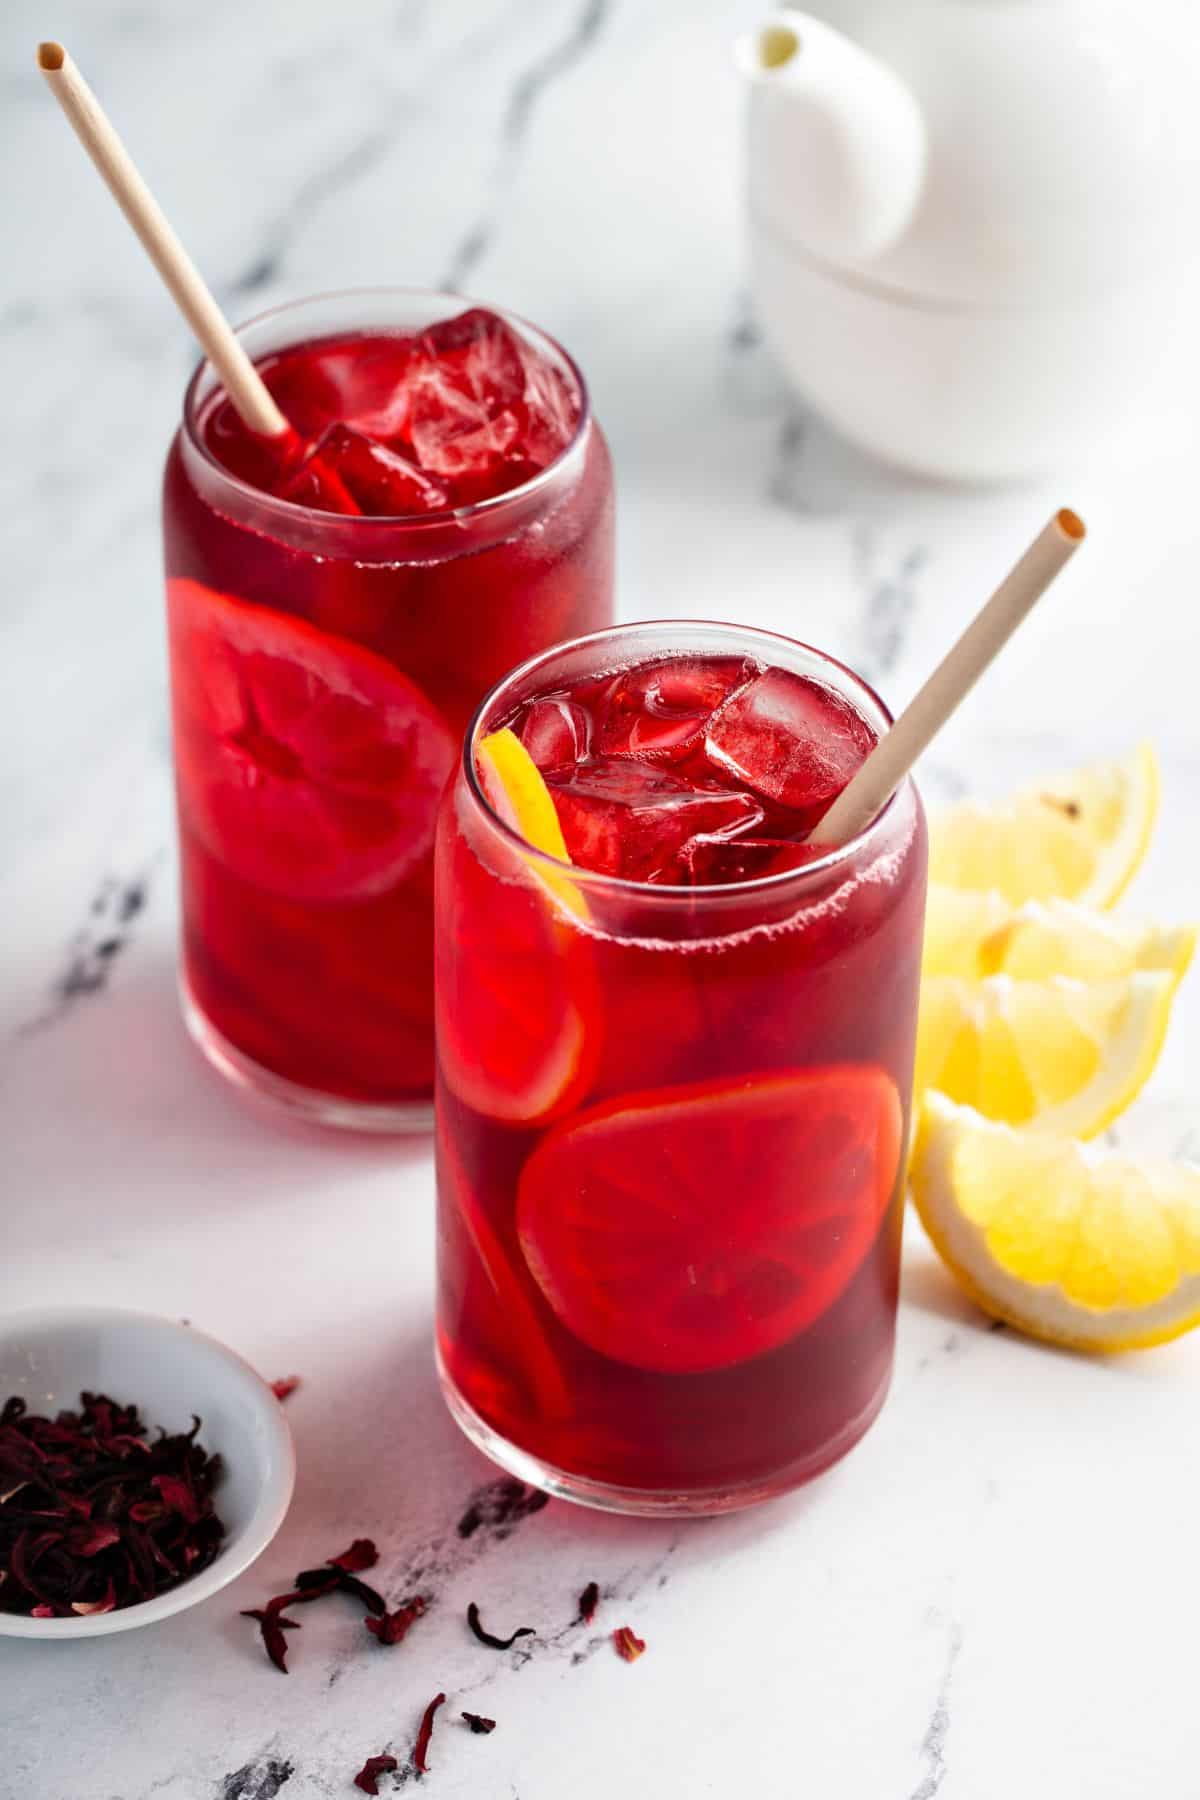 ICed hibiscus tea with lemon slices in glasses and dried hibiscus flowers on the side. 